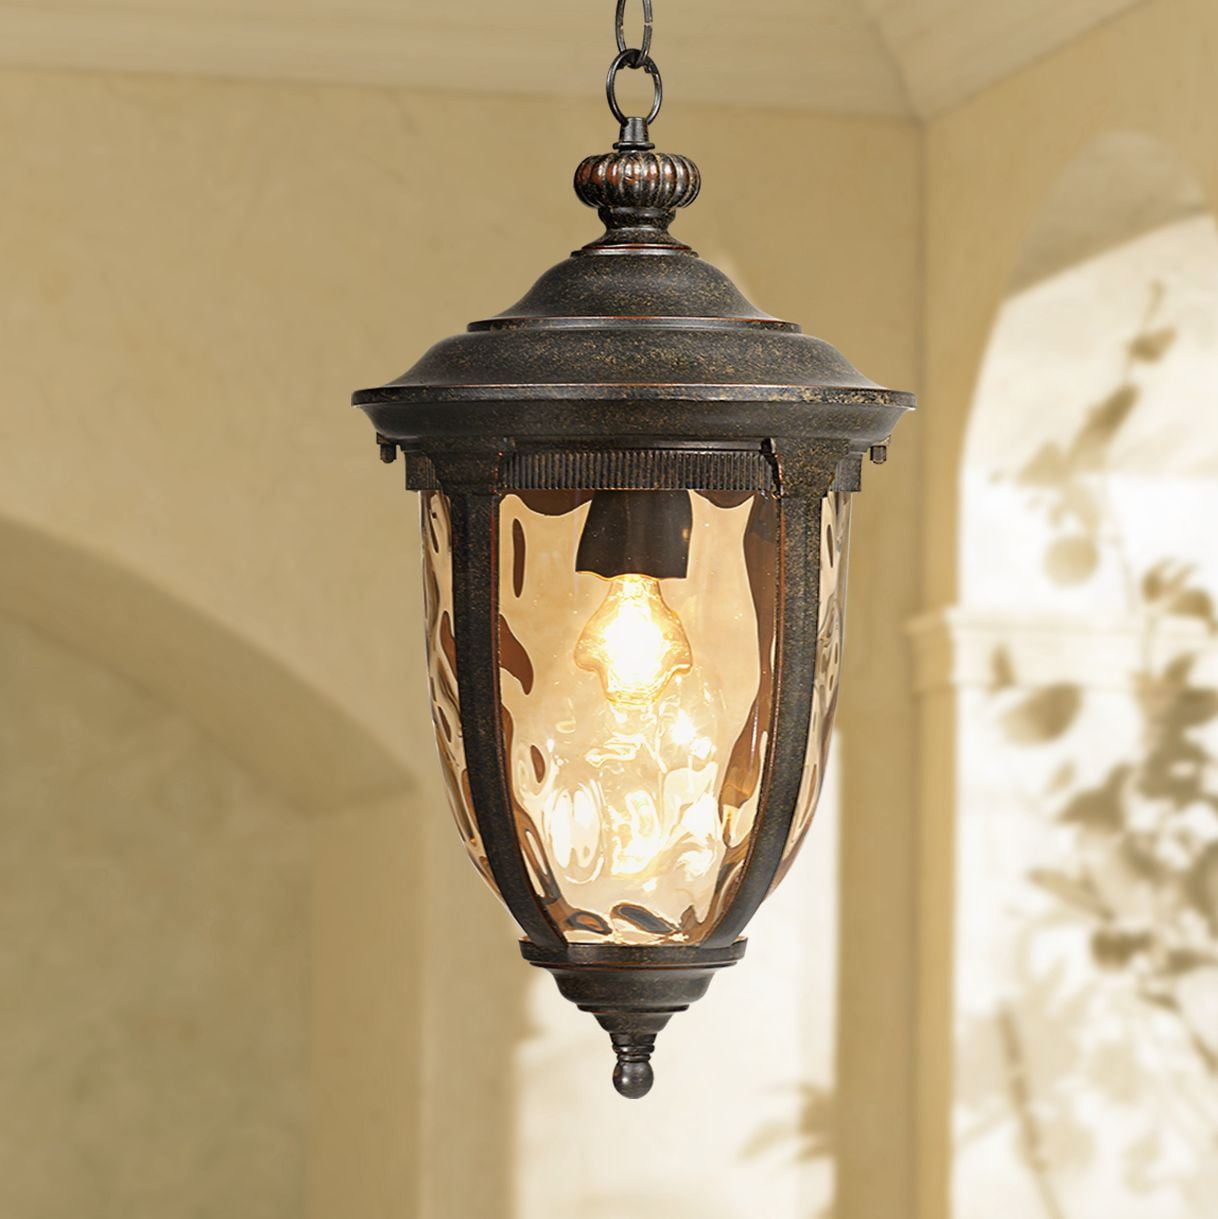 John Timberland Rustic Outdoor Ceiling, Rustic Outdoor Porch Lights